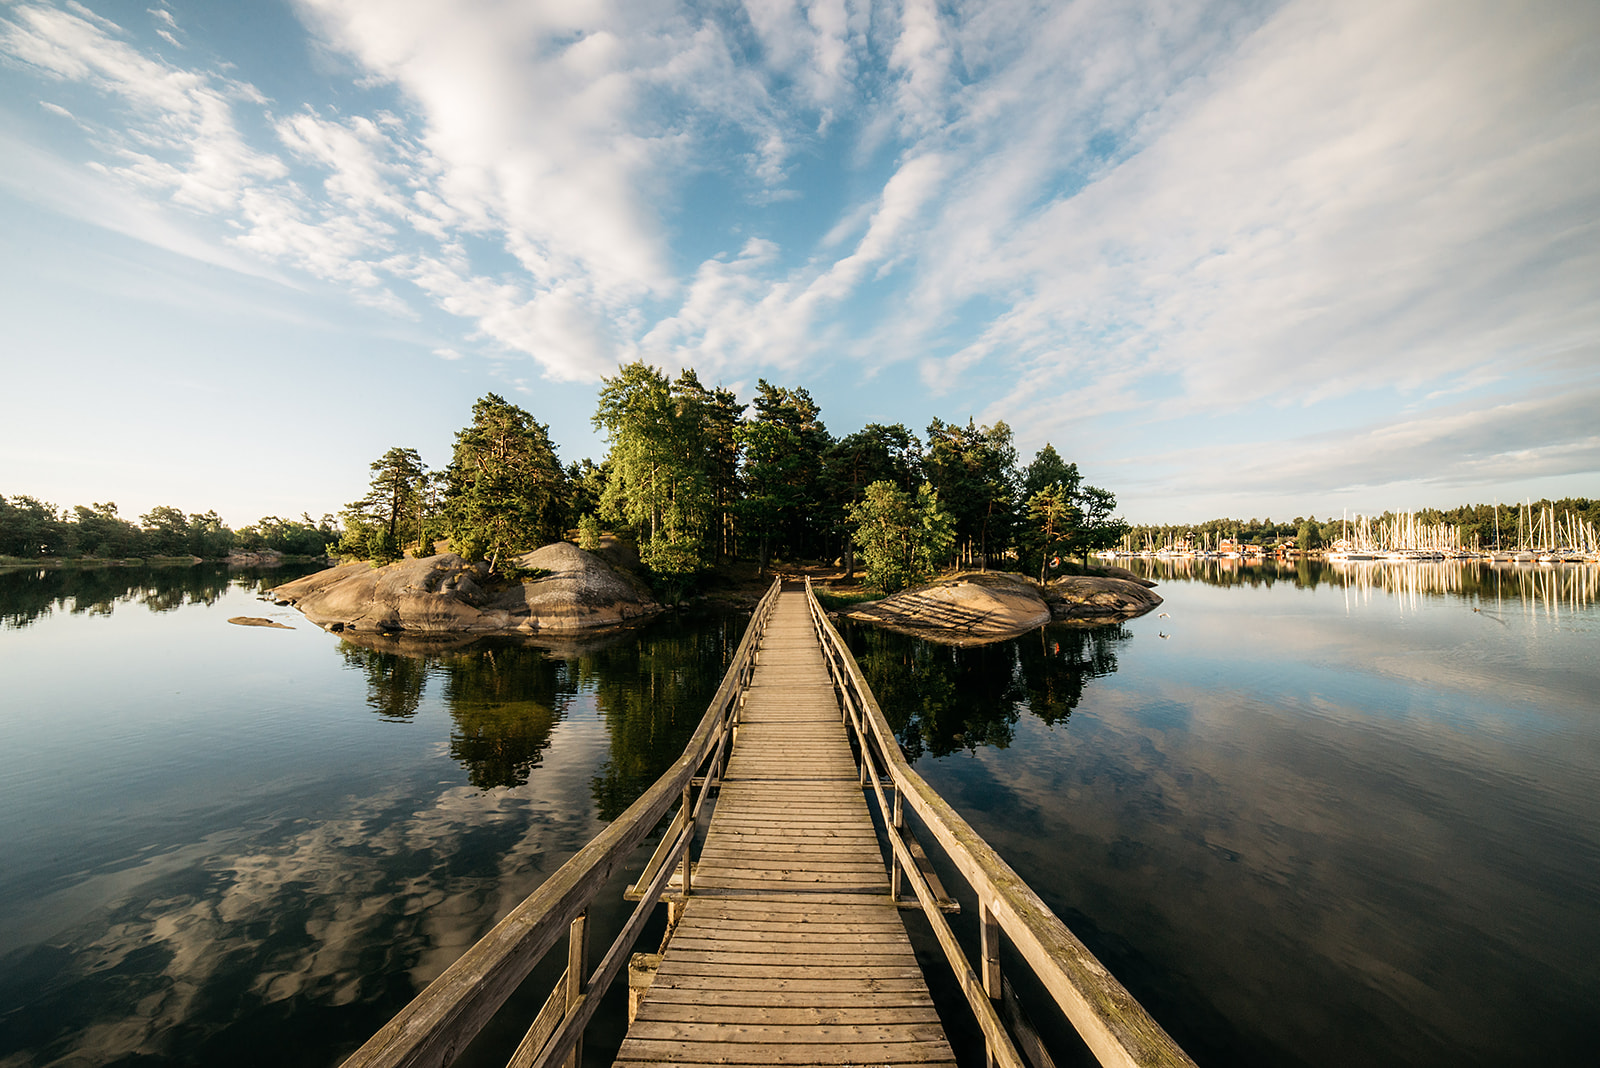 small island connected with wooden bridge in Sweden